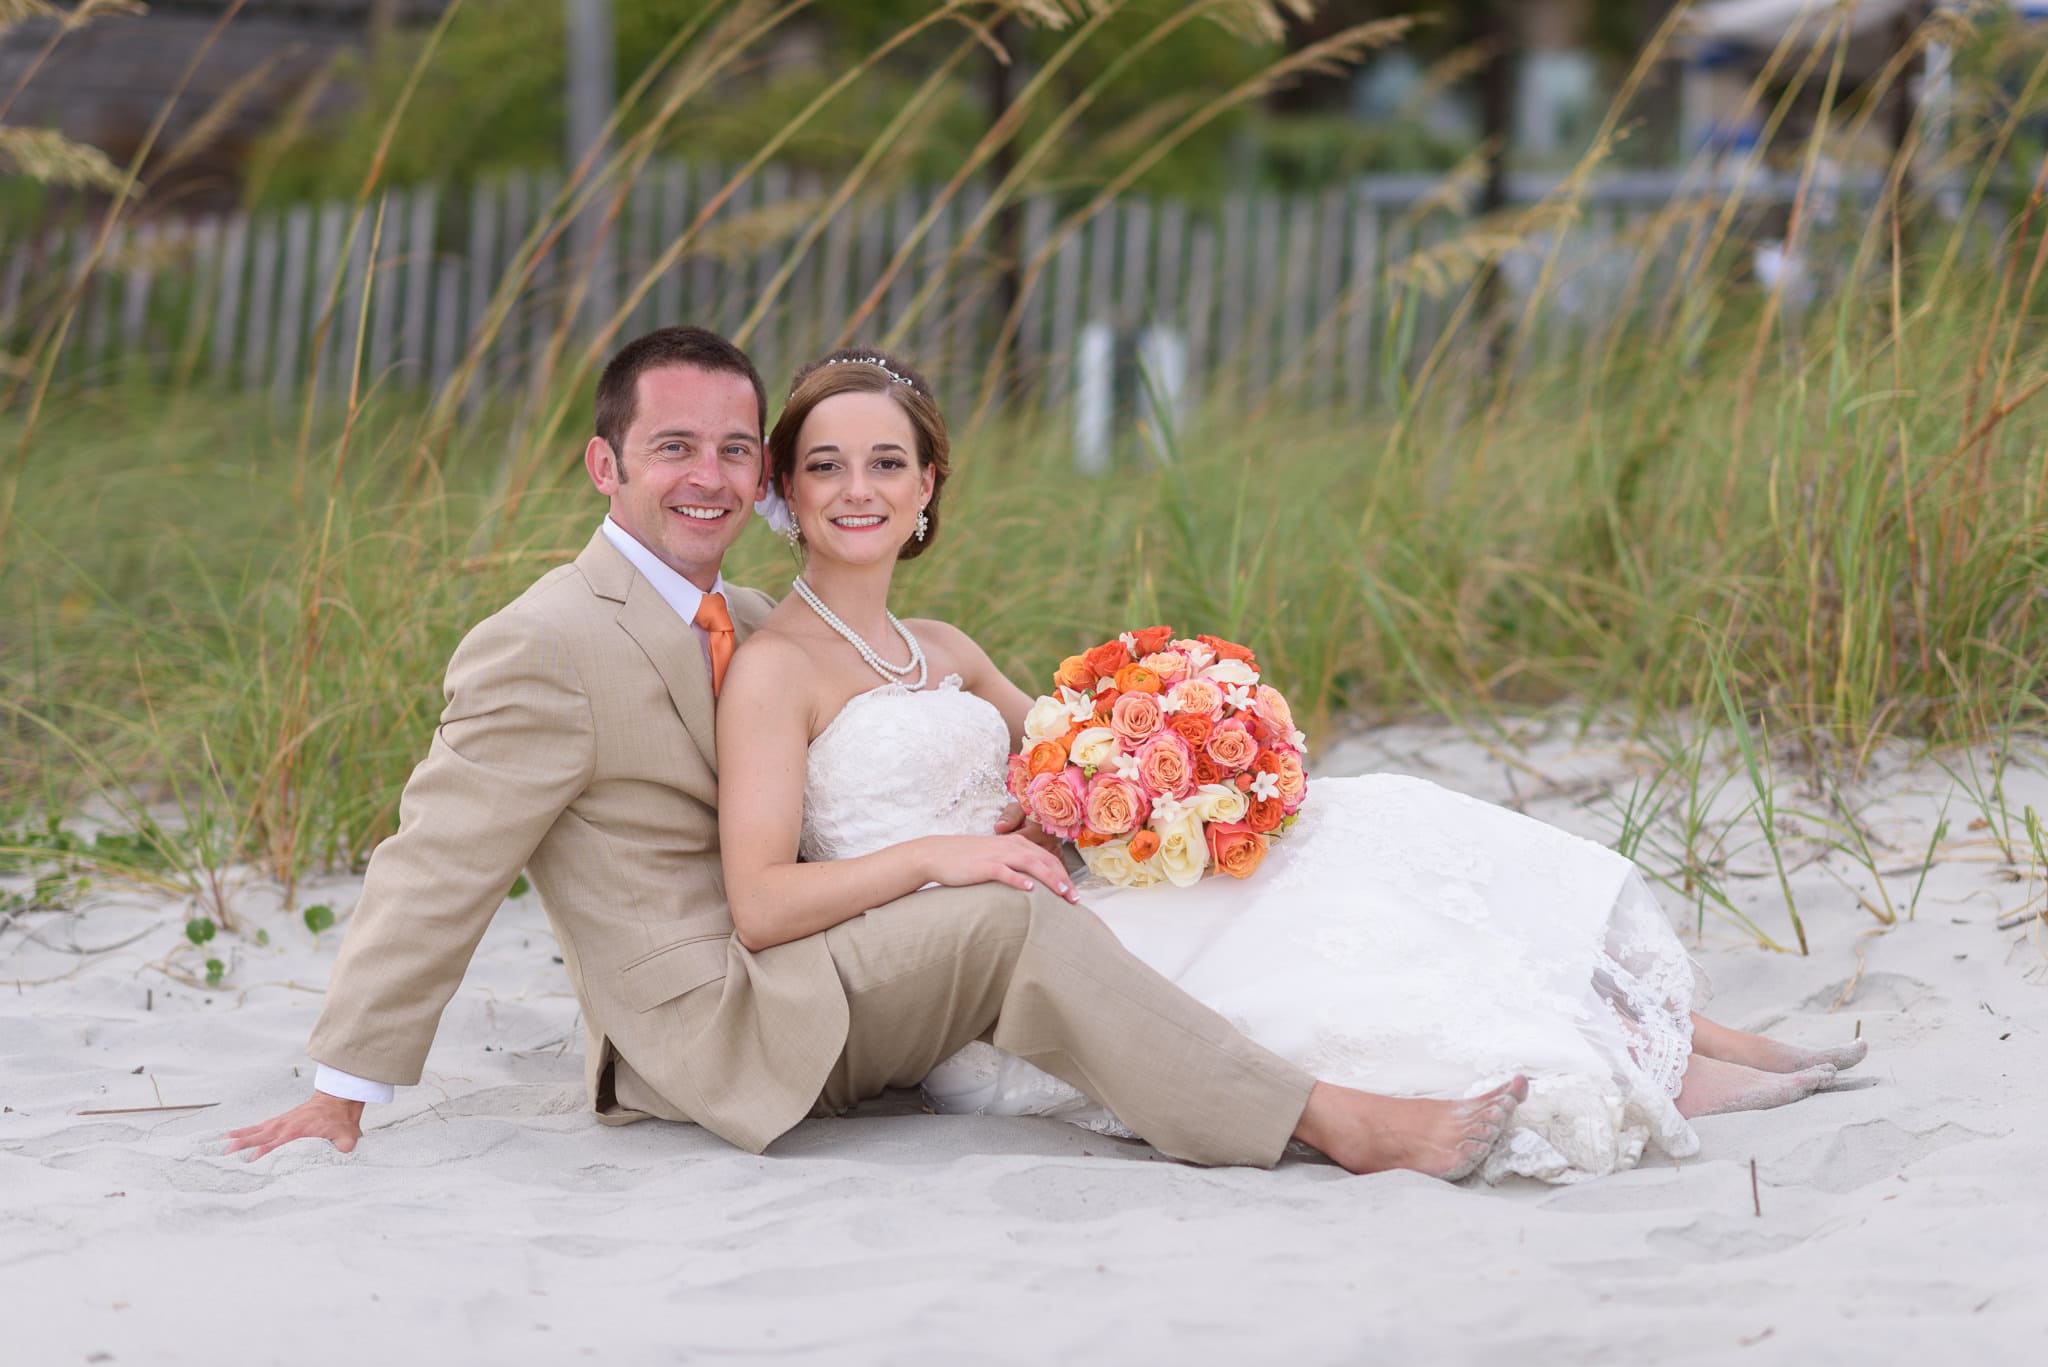 Wedding couple sitting together in front of the sea oats - Hilton at Kingston Plantation